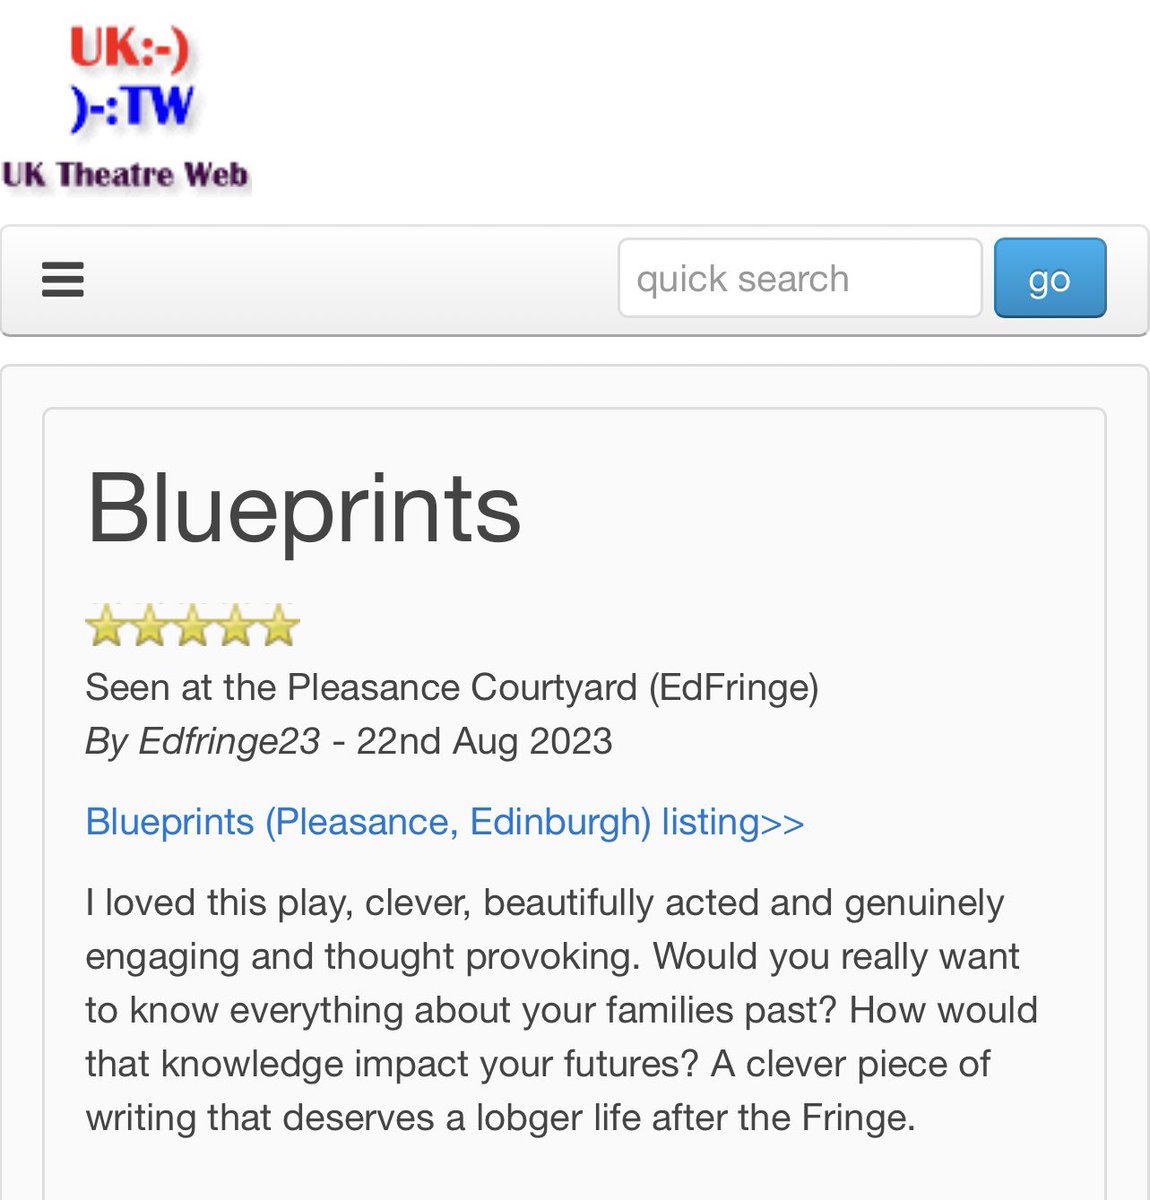 Woke up to another review this morning. Congrats Blueprints team 💙💙💙